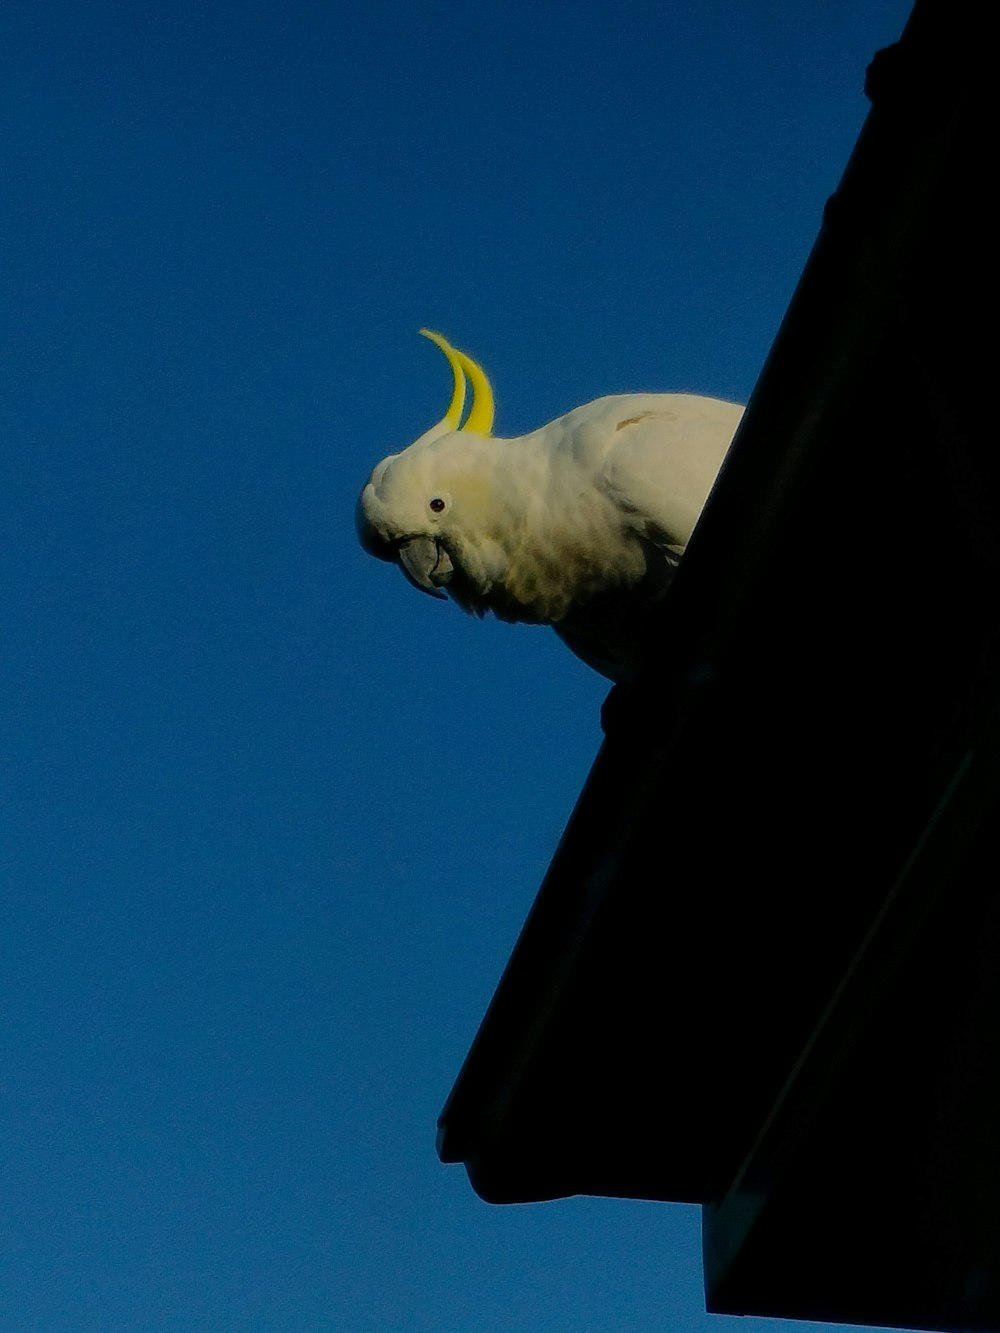 a white bird with a yellow stripe on its head